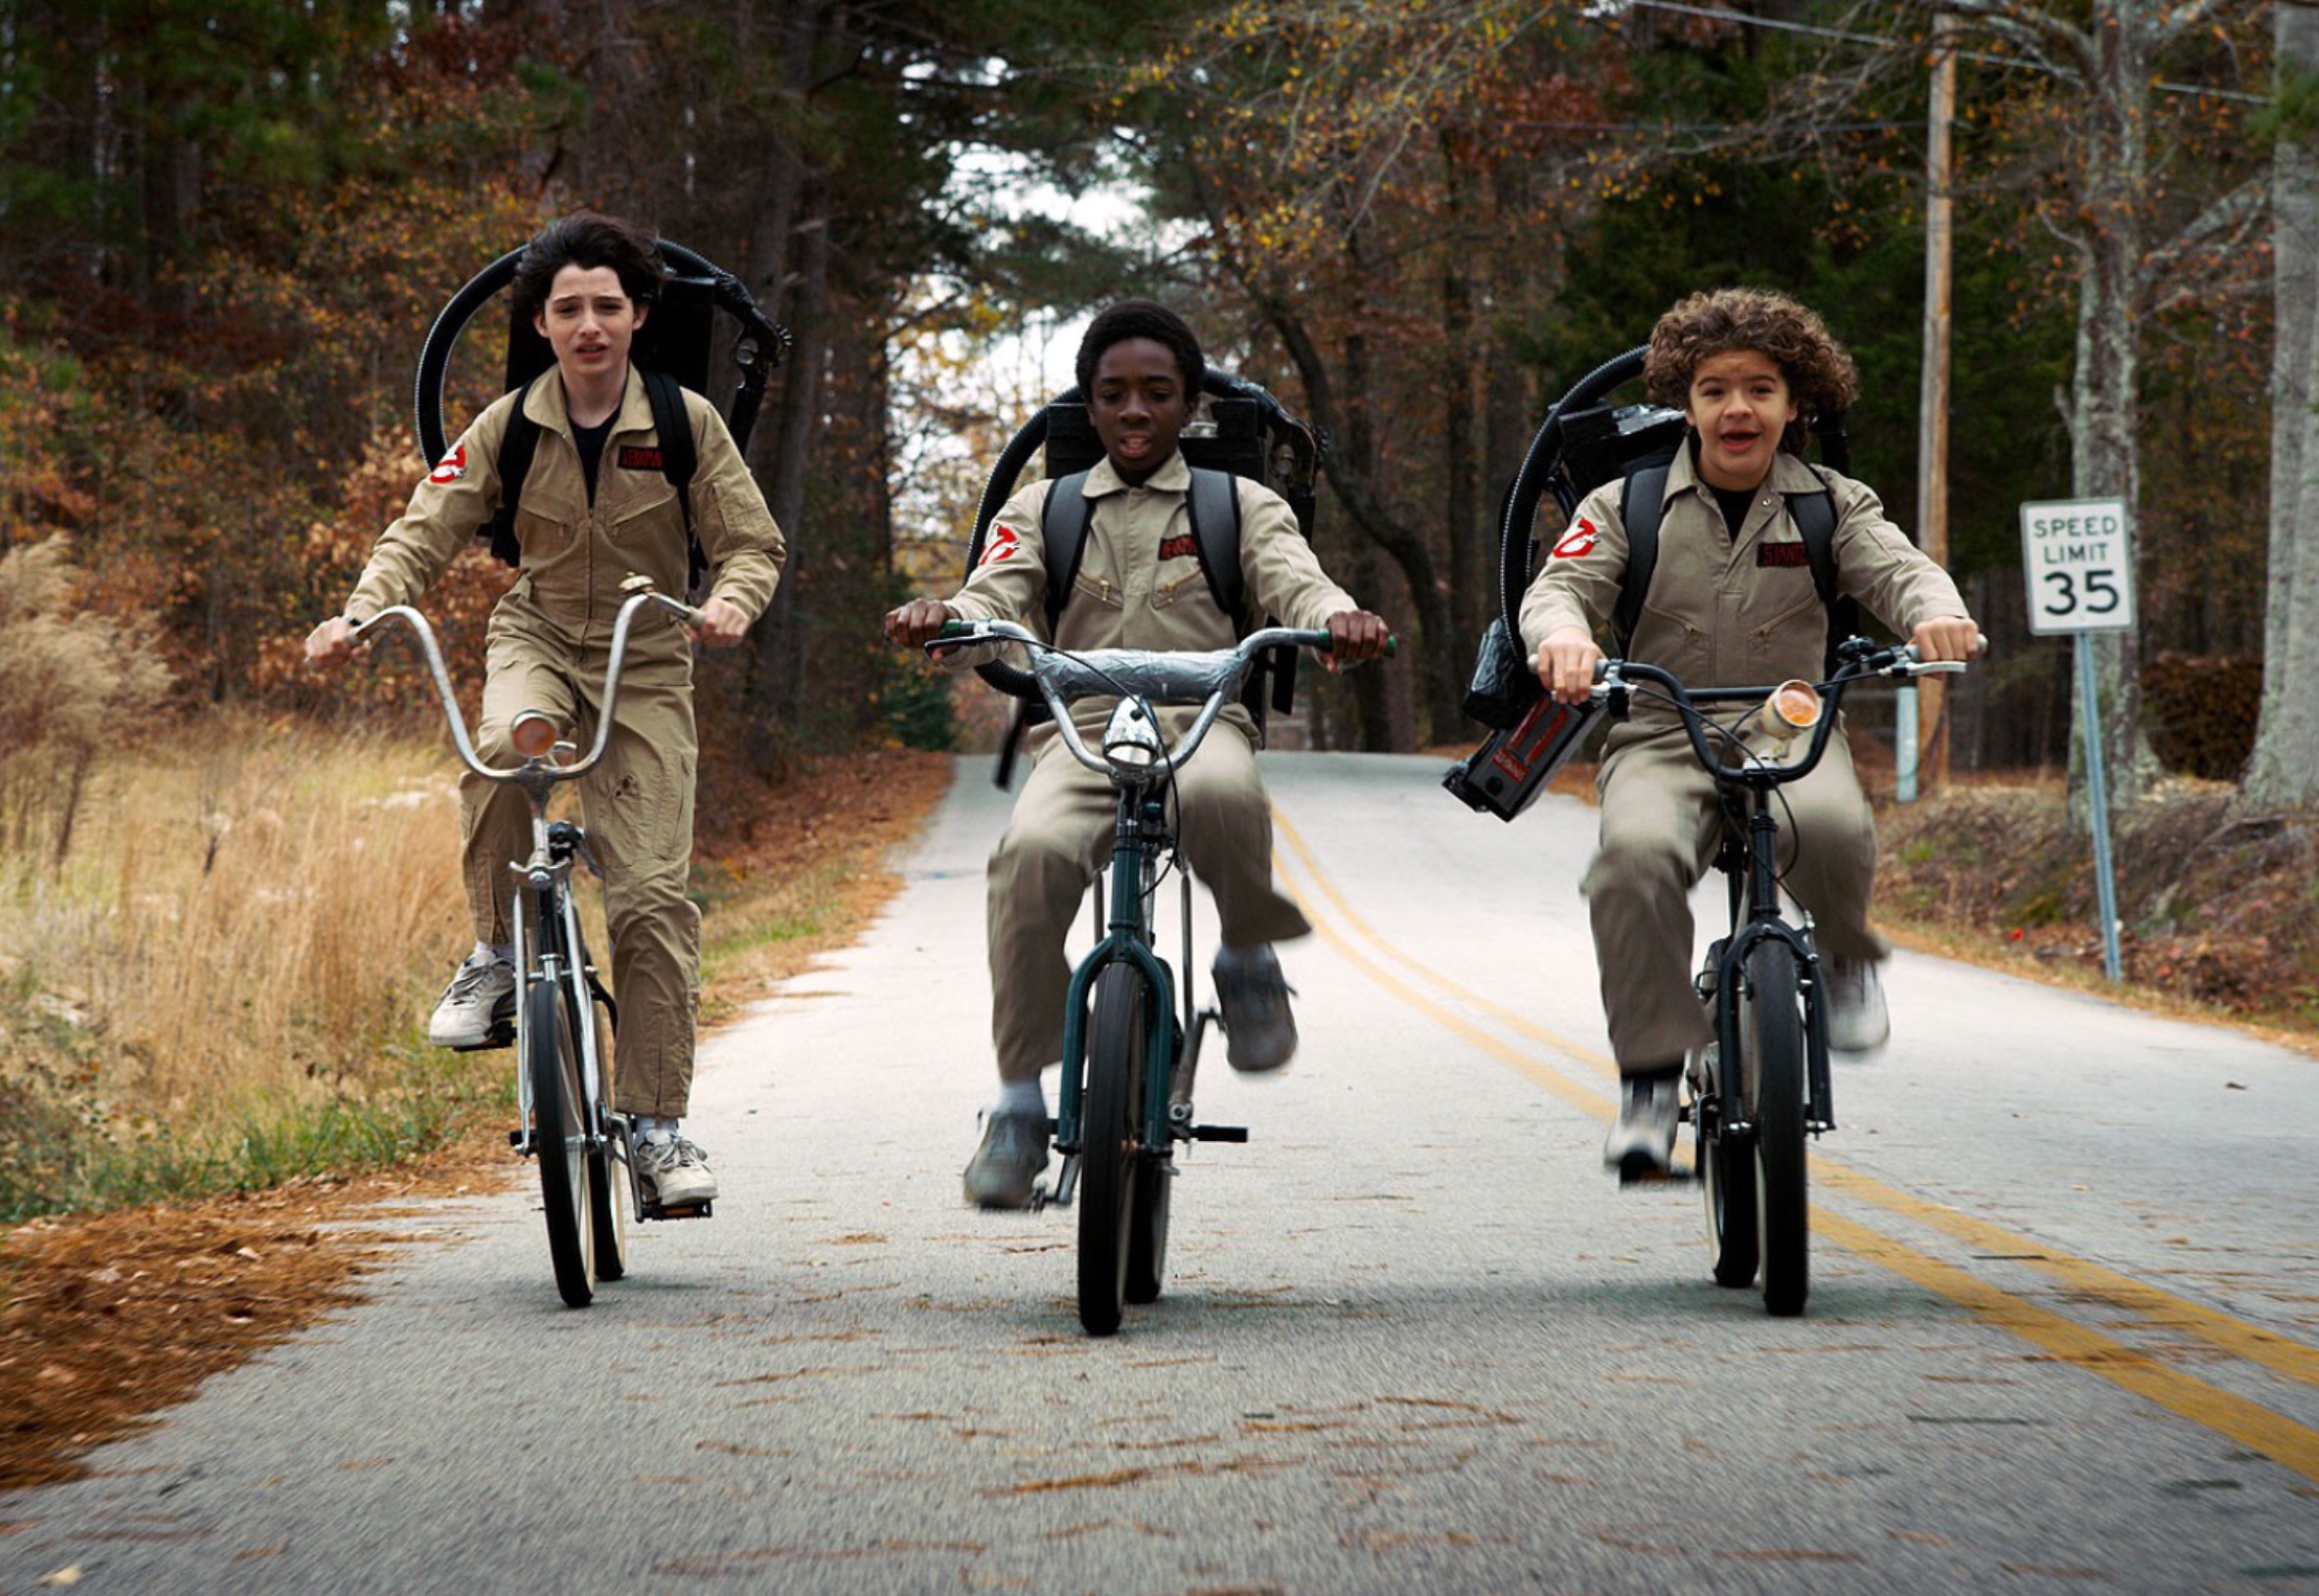 The beloved Stranger Things trio searching for their friend Will on bikes, similar to the Geeks.